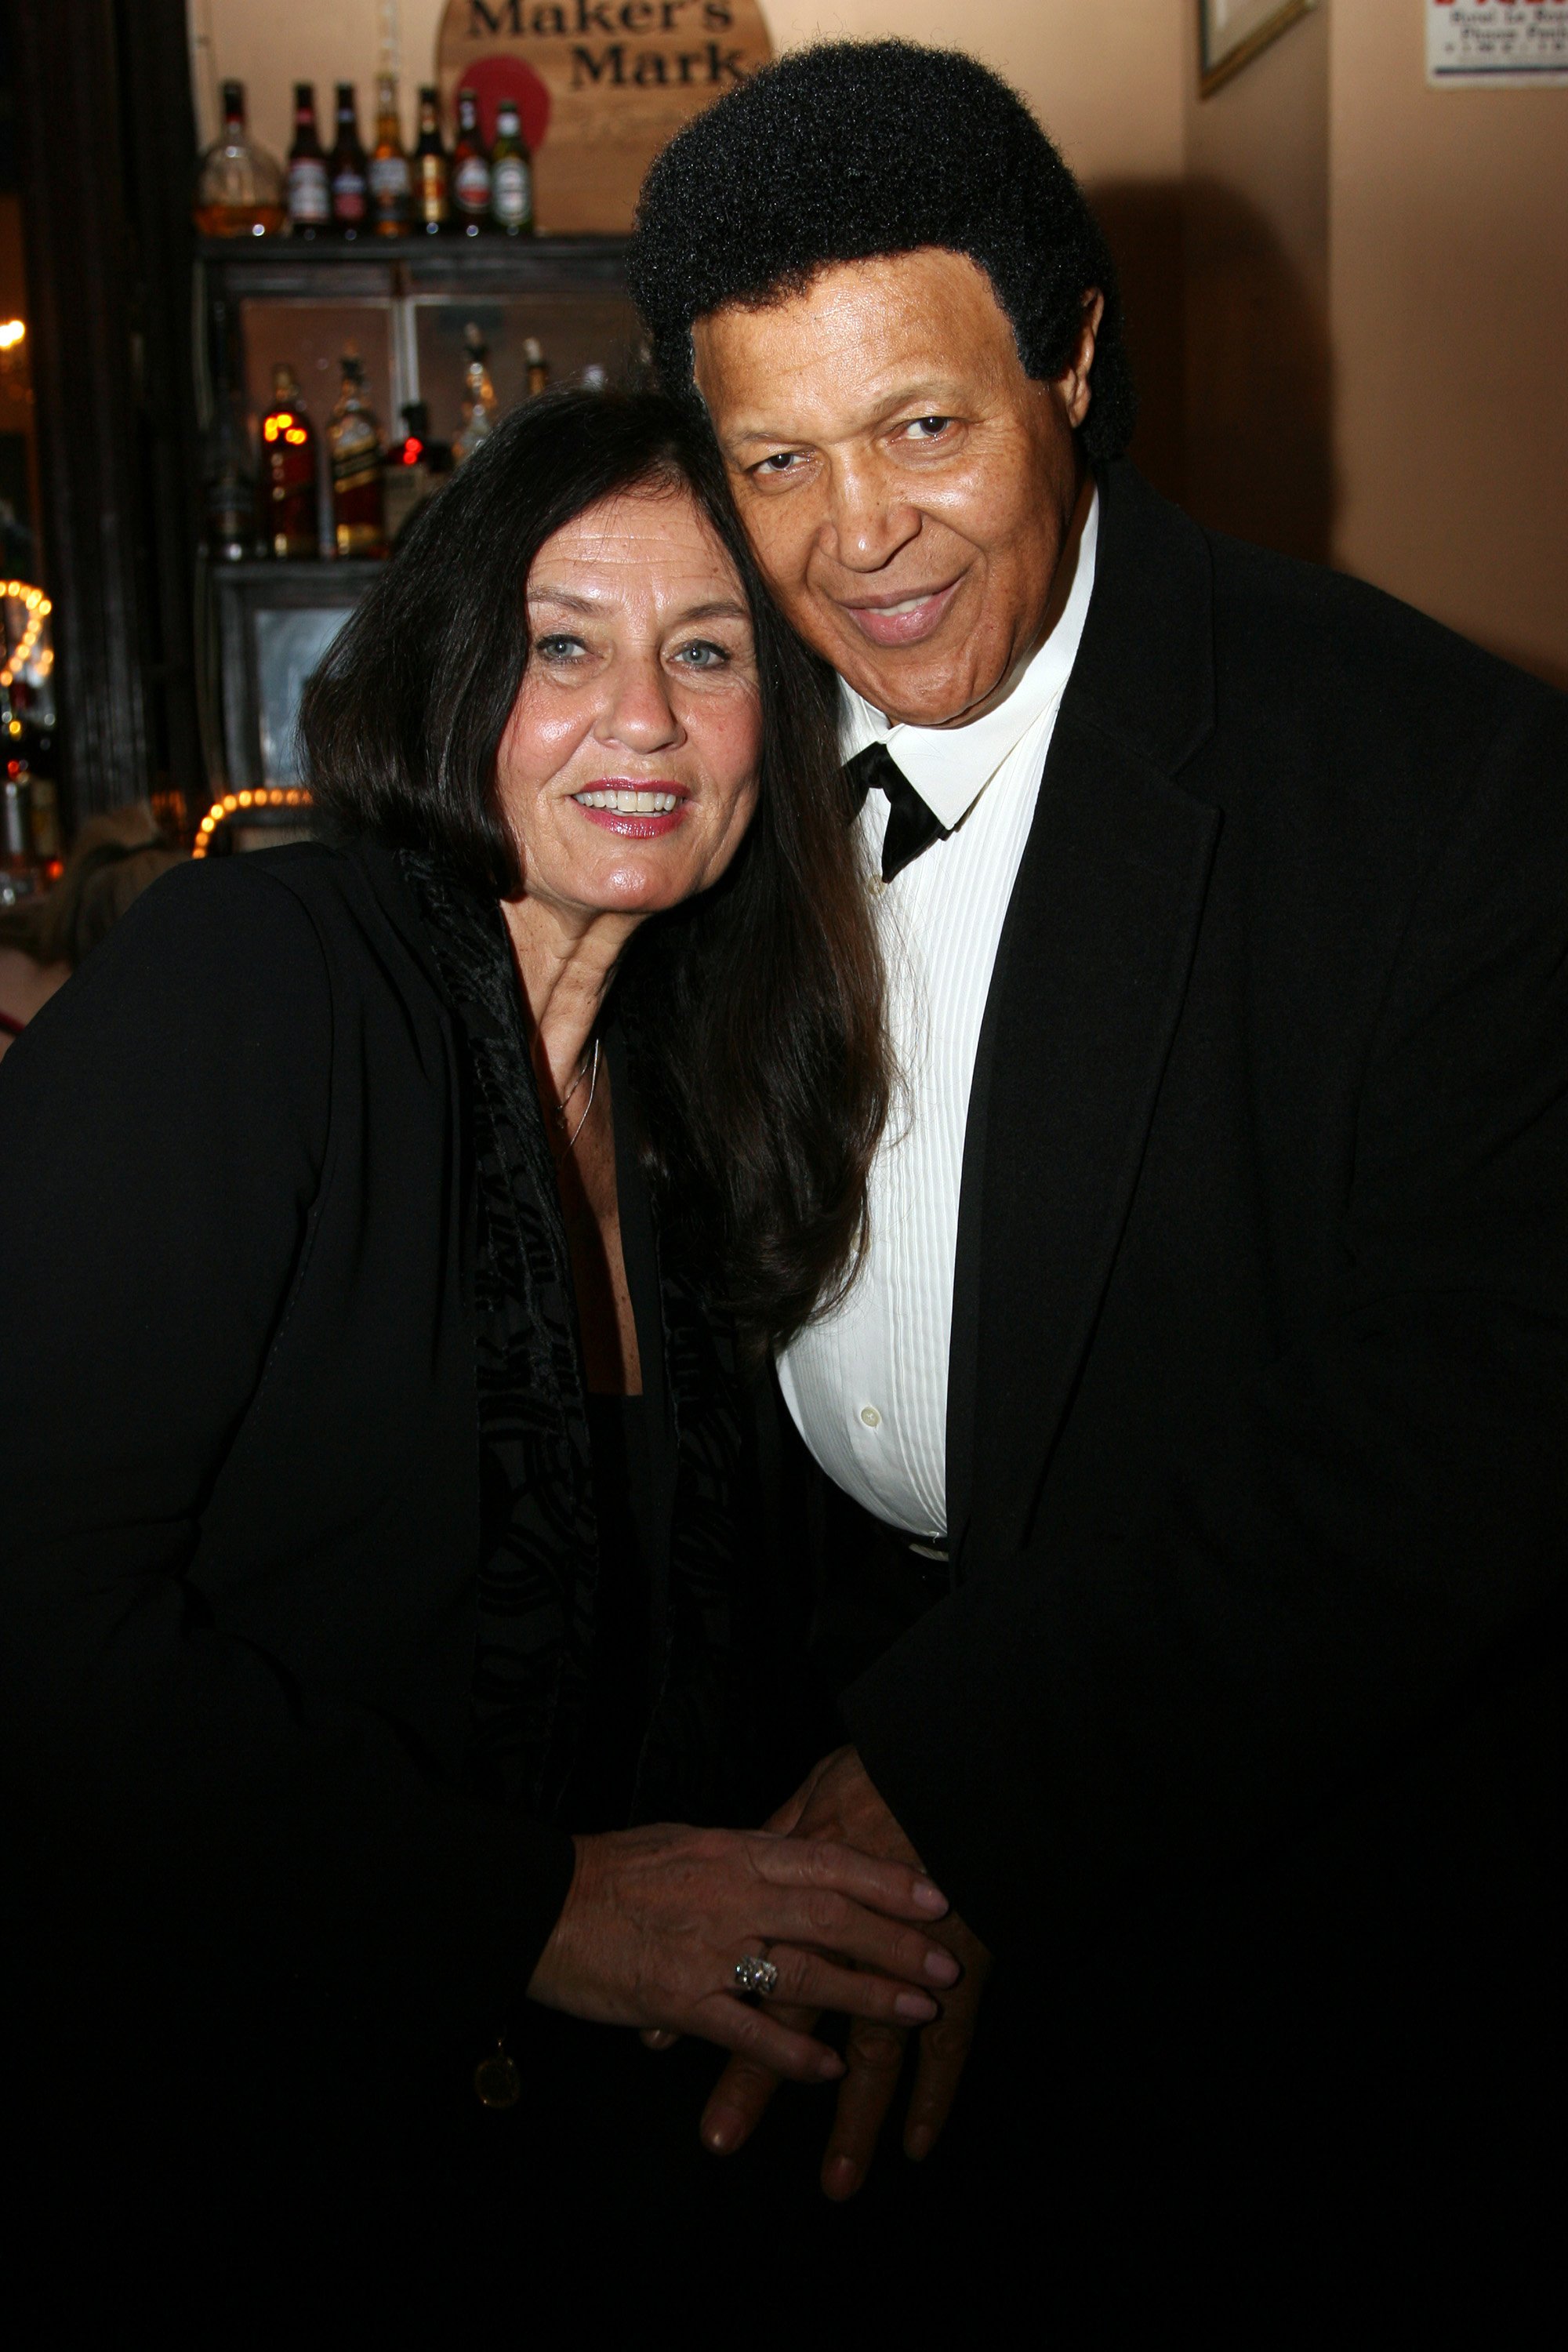 Chubby Checker and Catharina Lodders in New York 2008. | Source: Getty Images